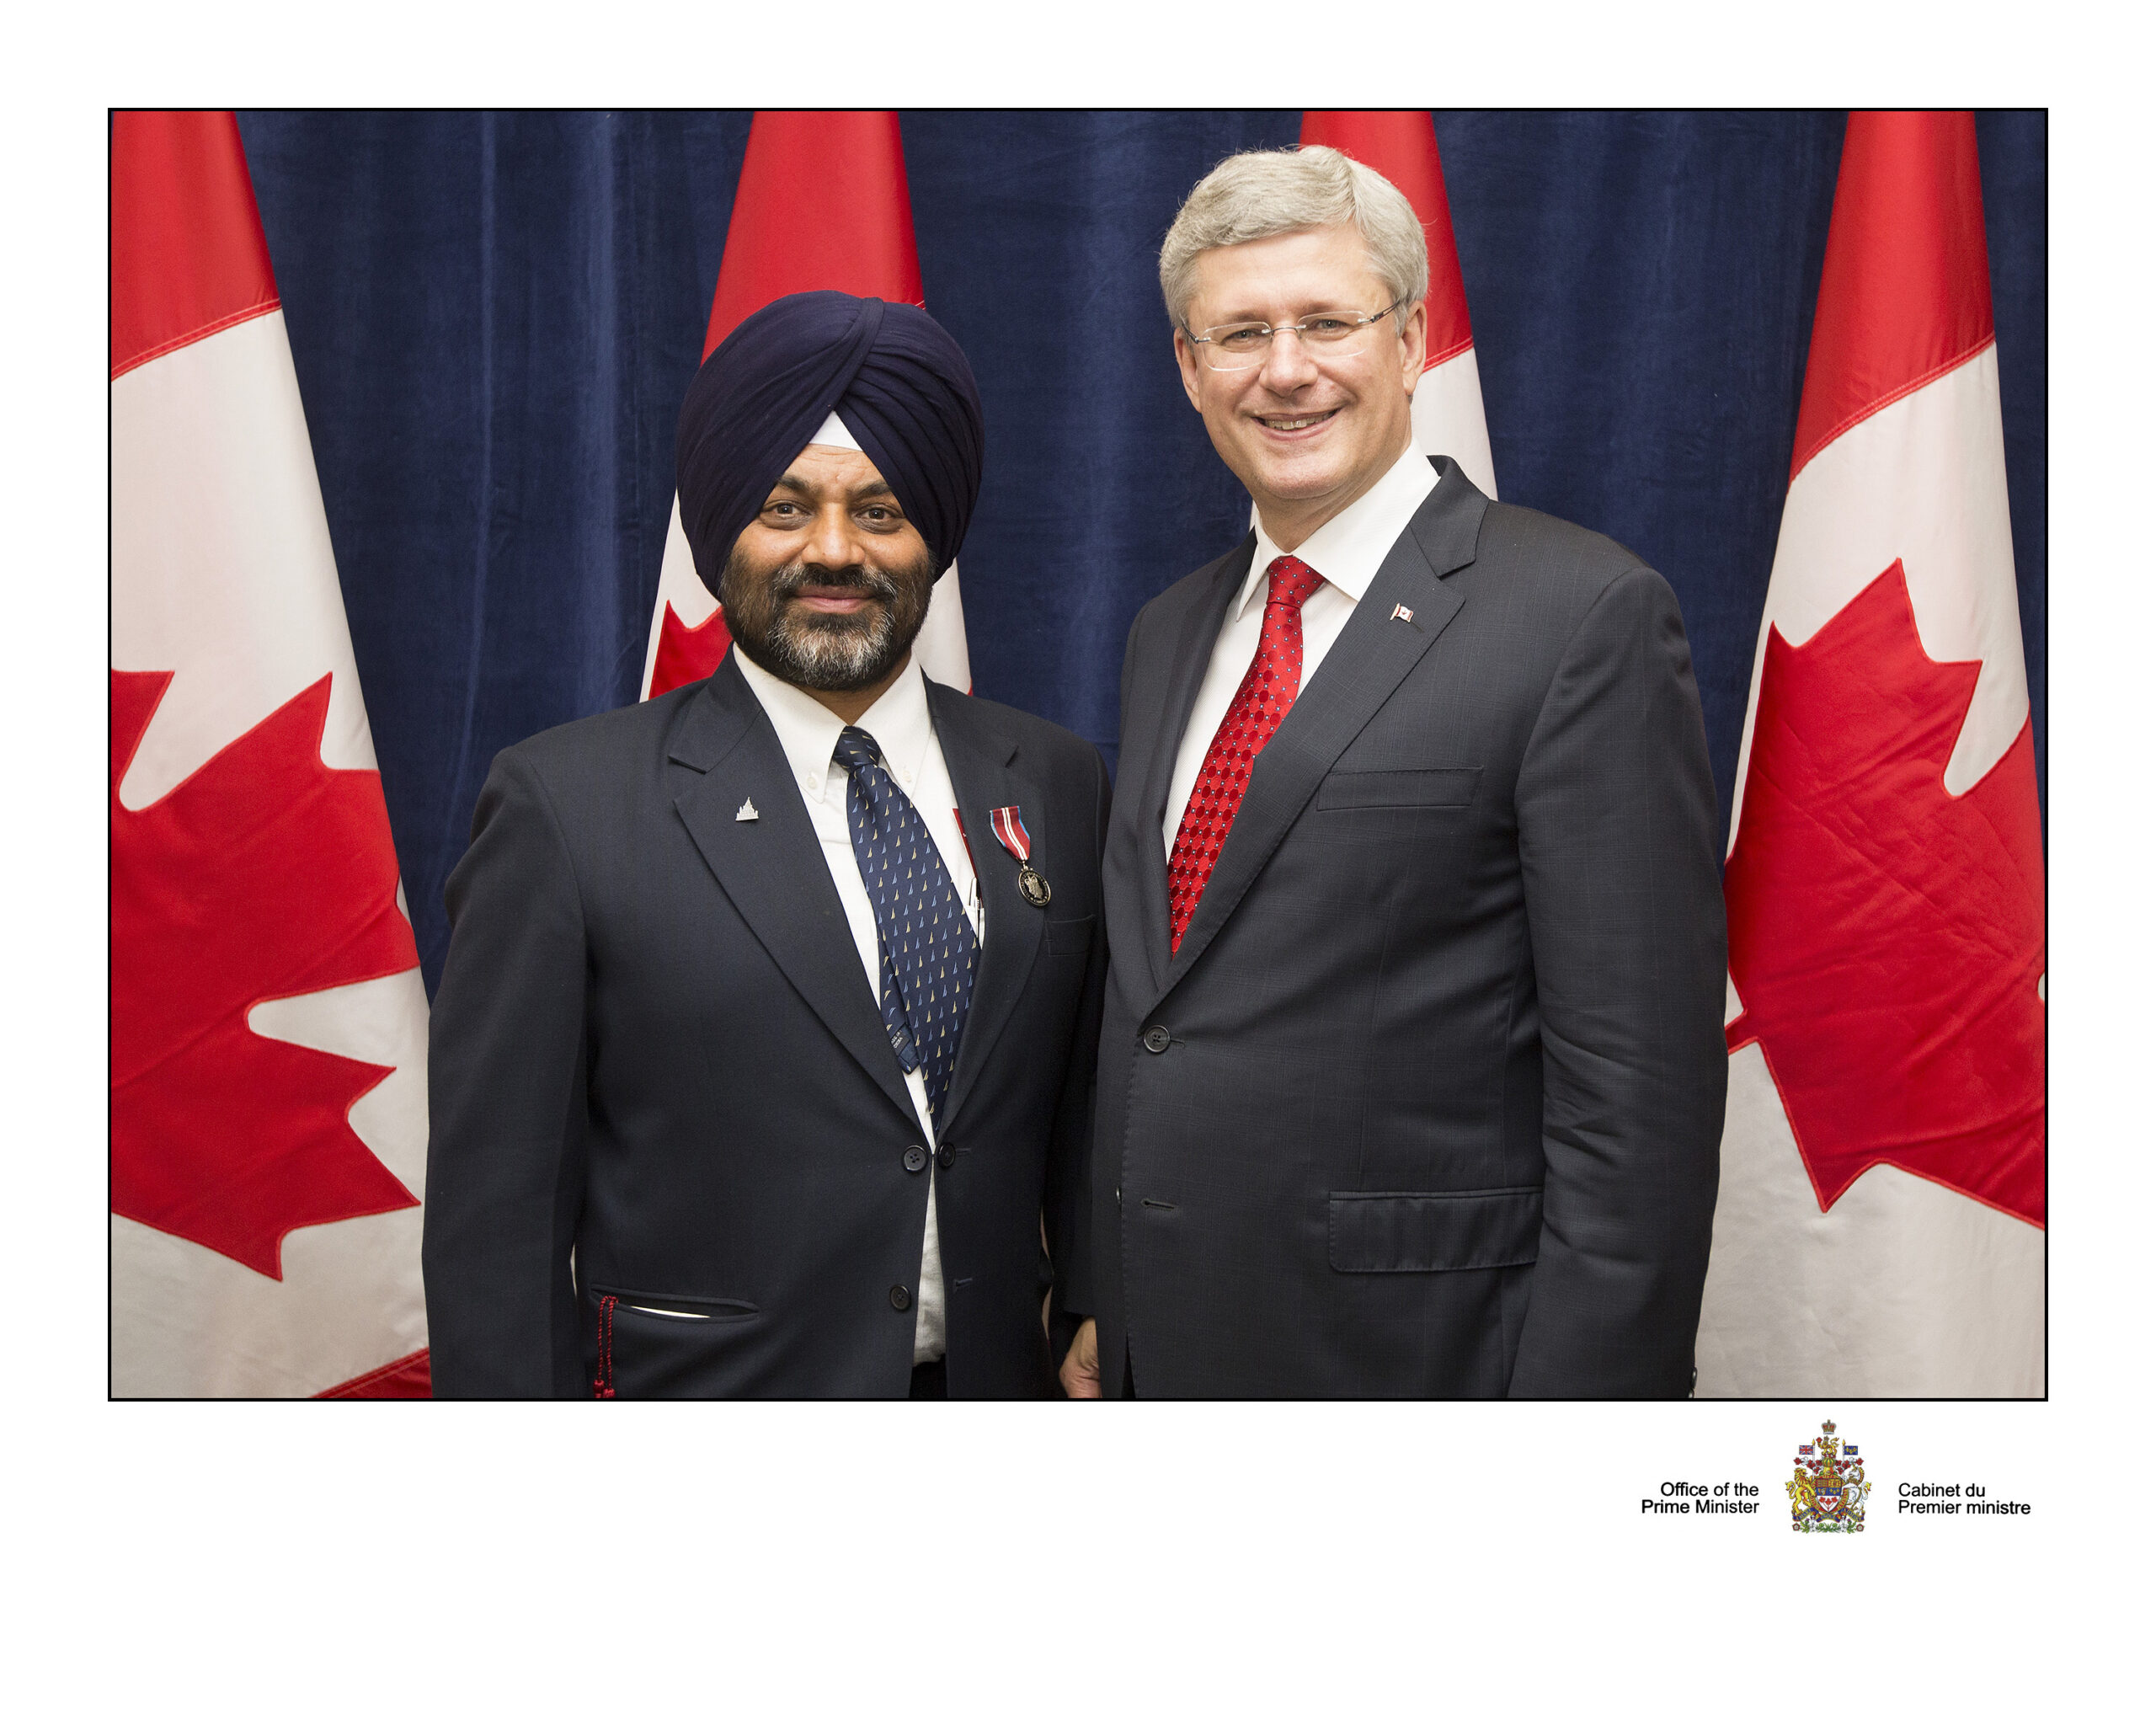 An Invitation to Witness History: Attending the Throne Speech Event